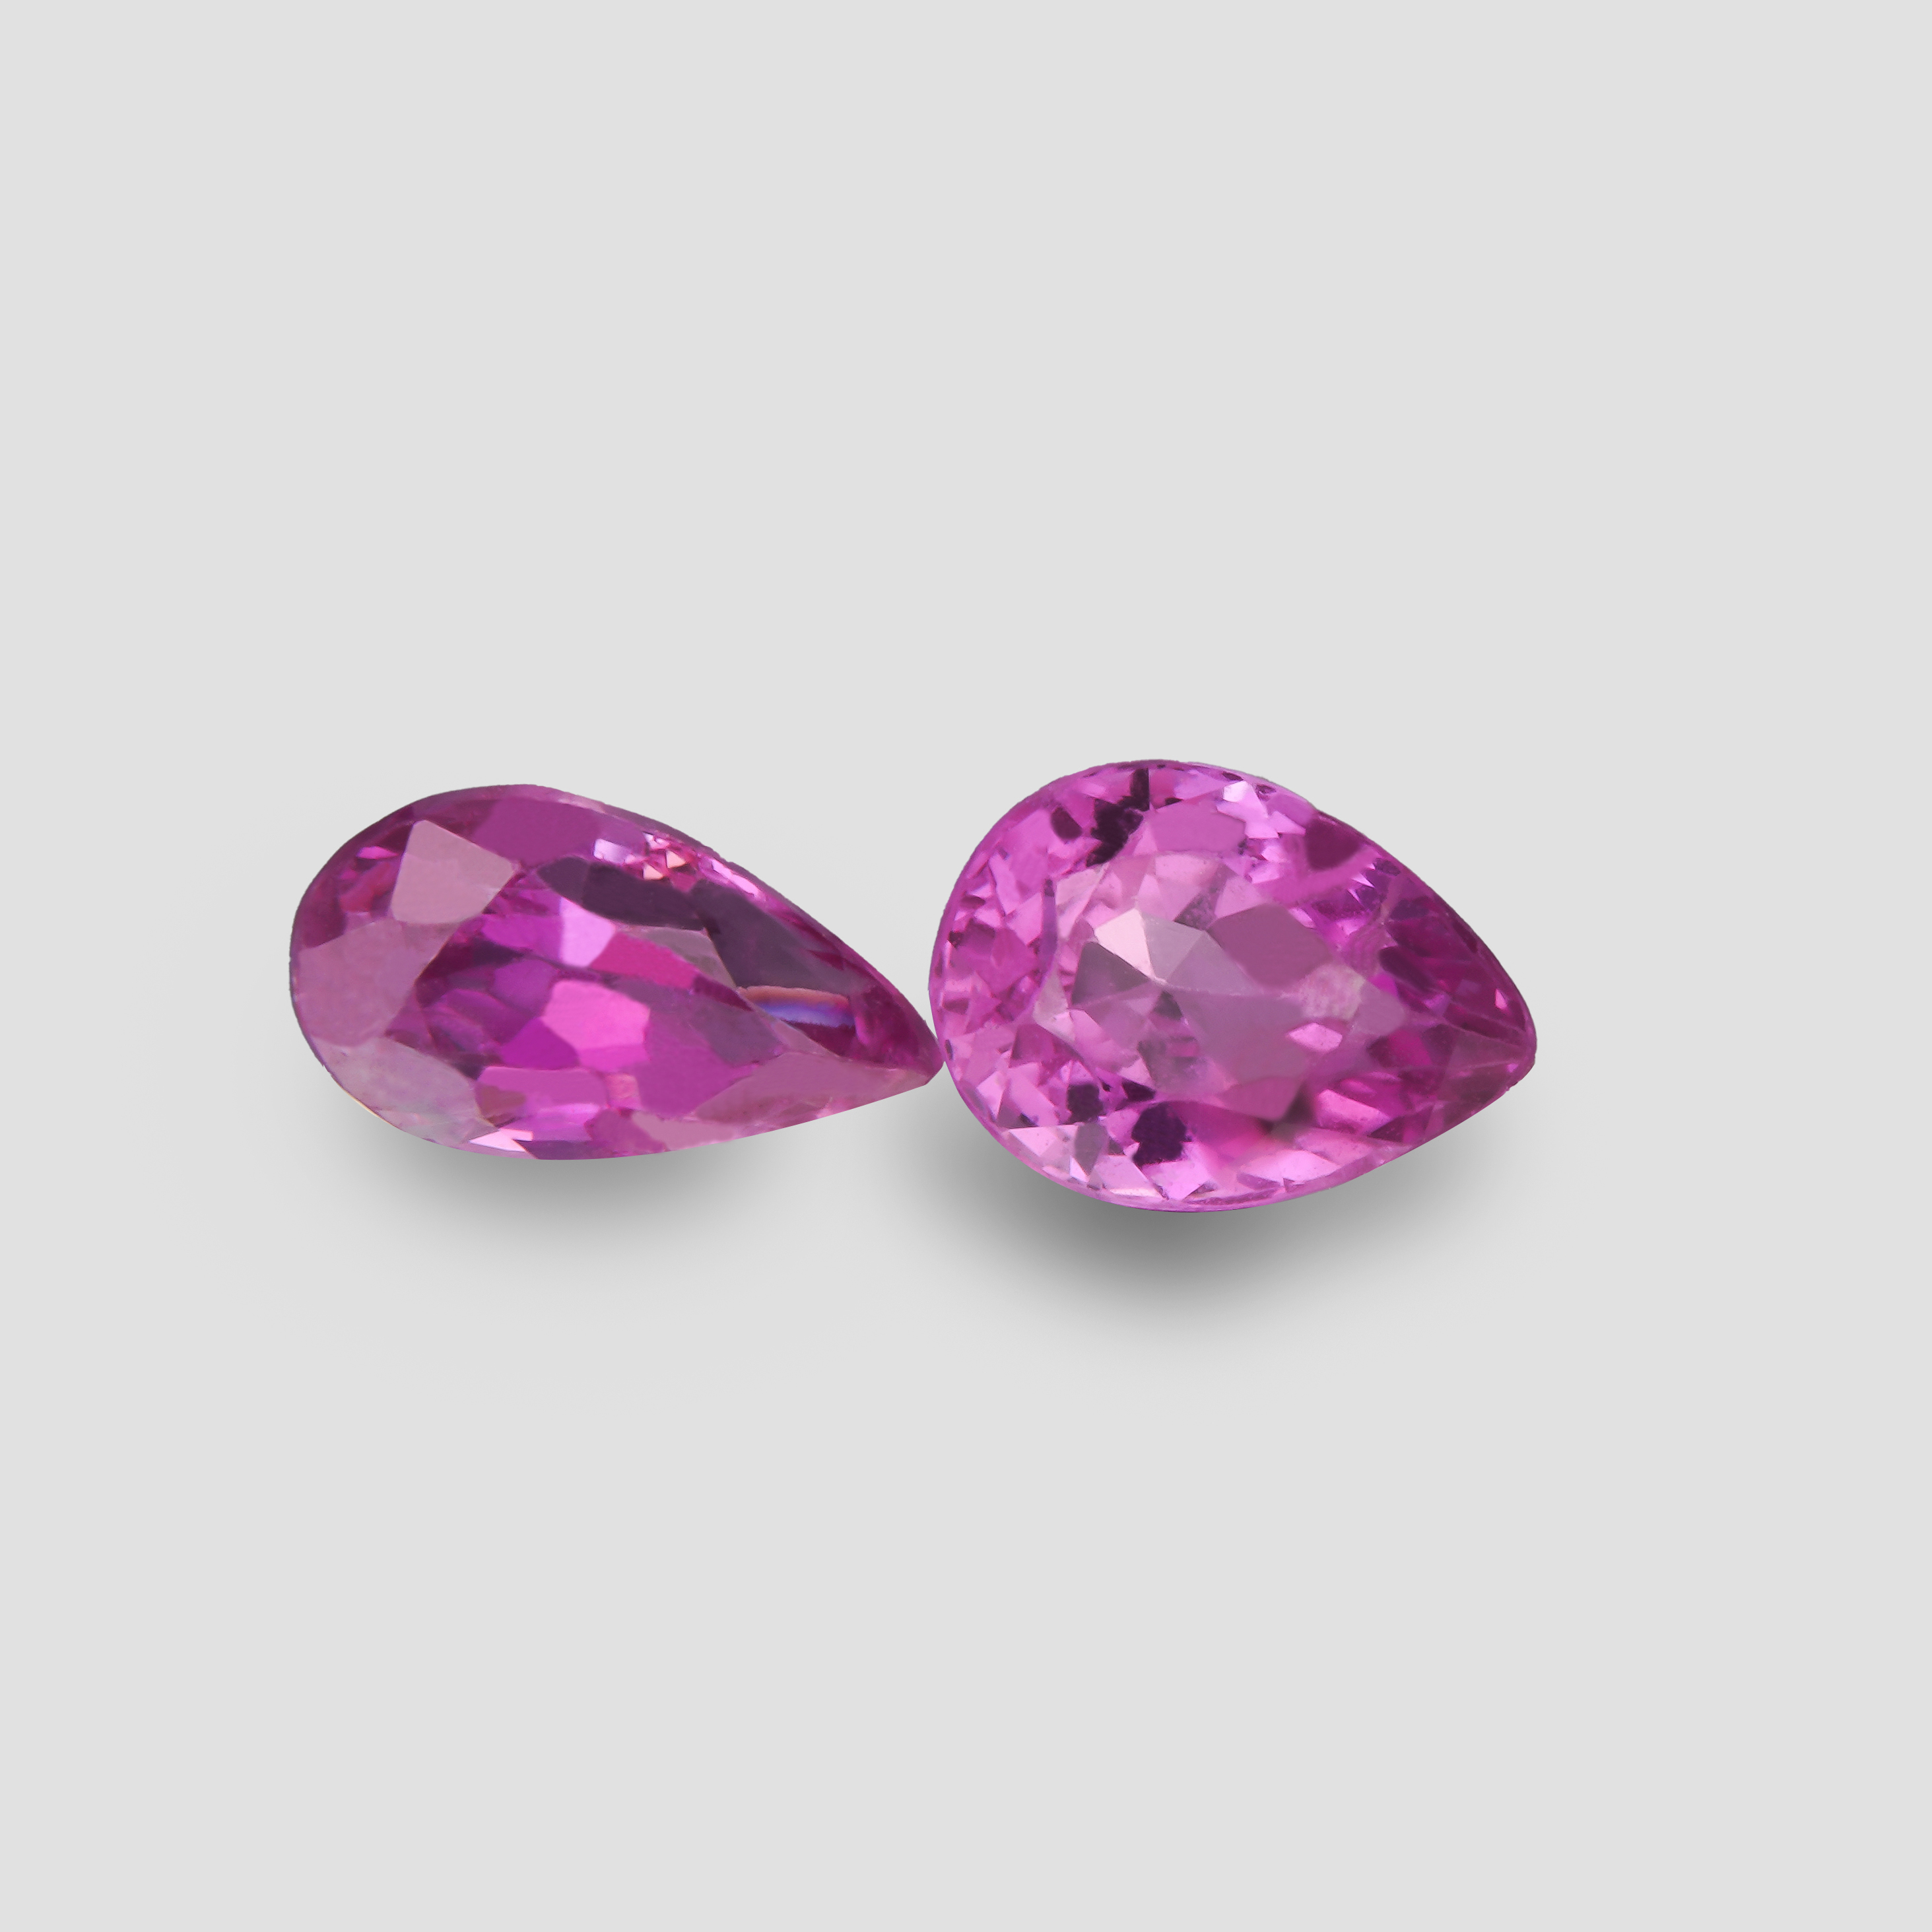 (do)(keep/add description) (R?s?) Chic pinkish red rubies ideal